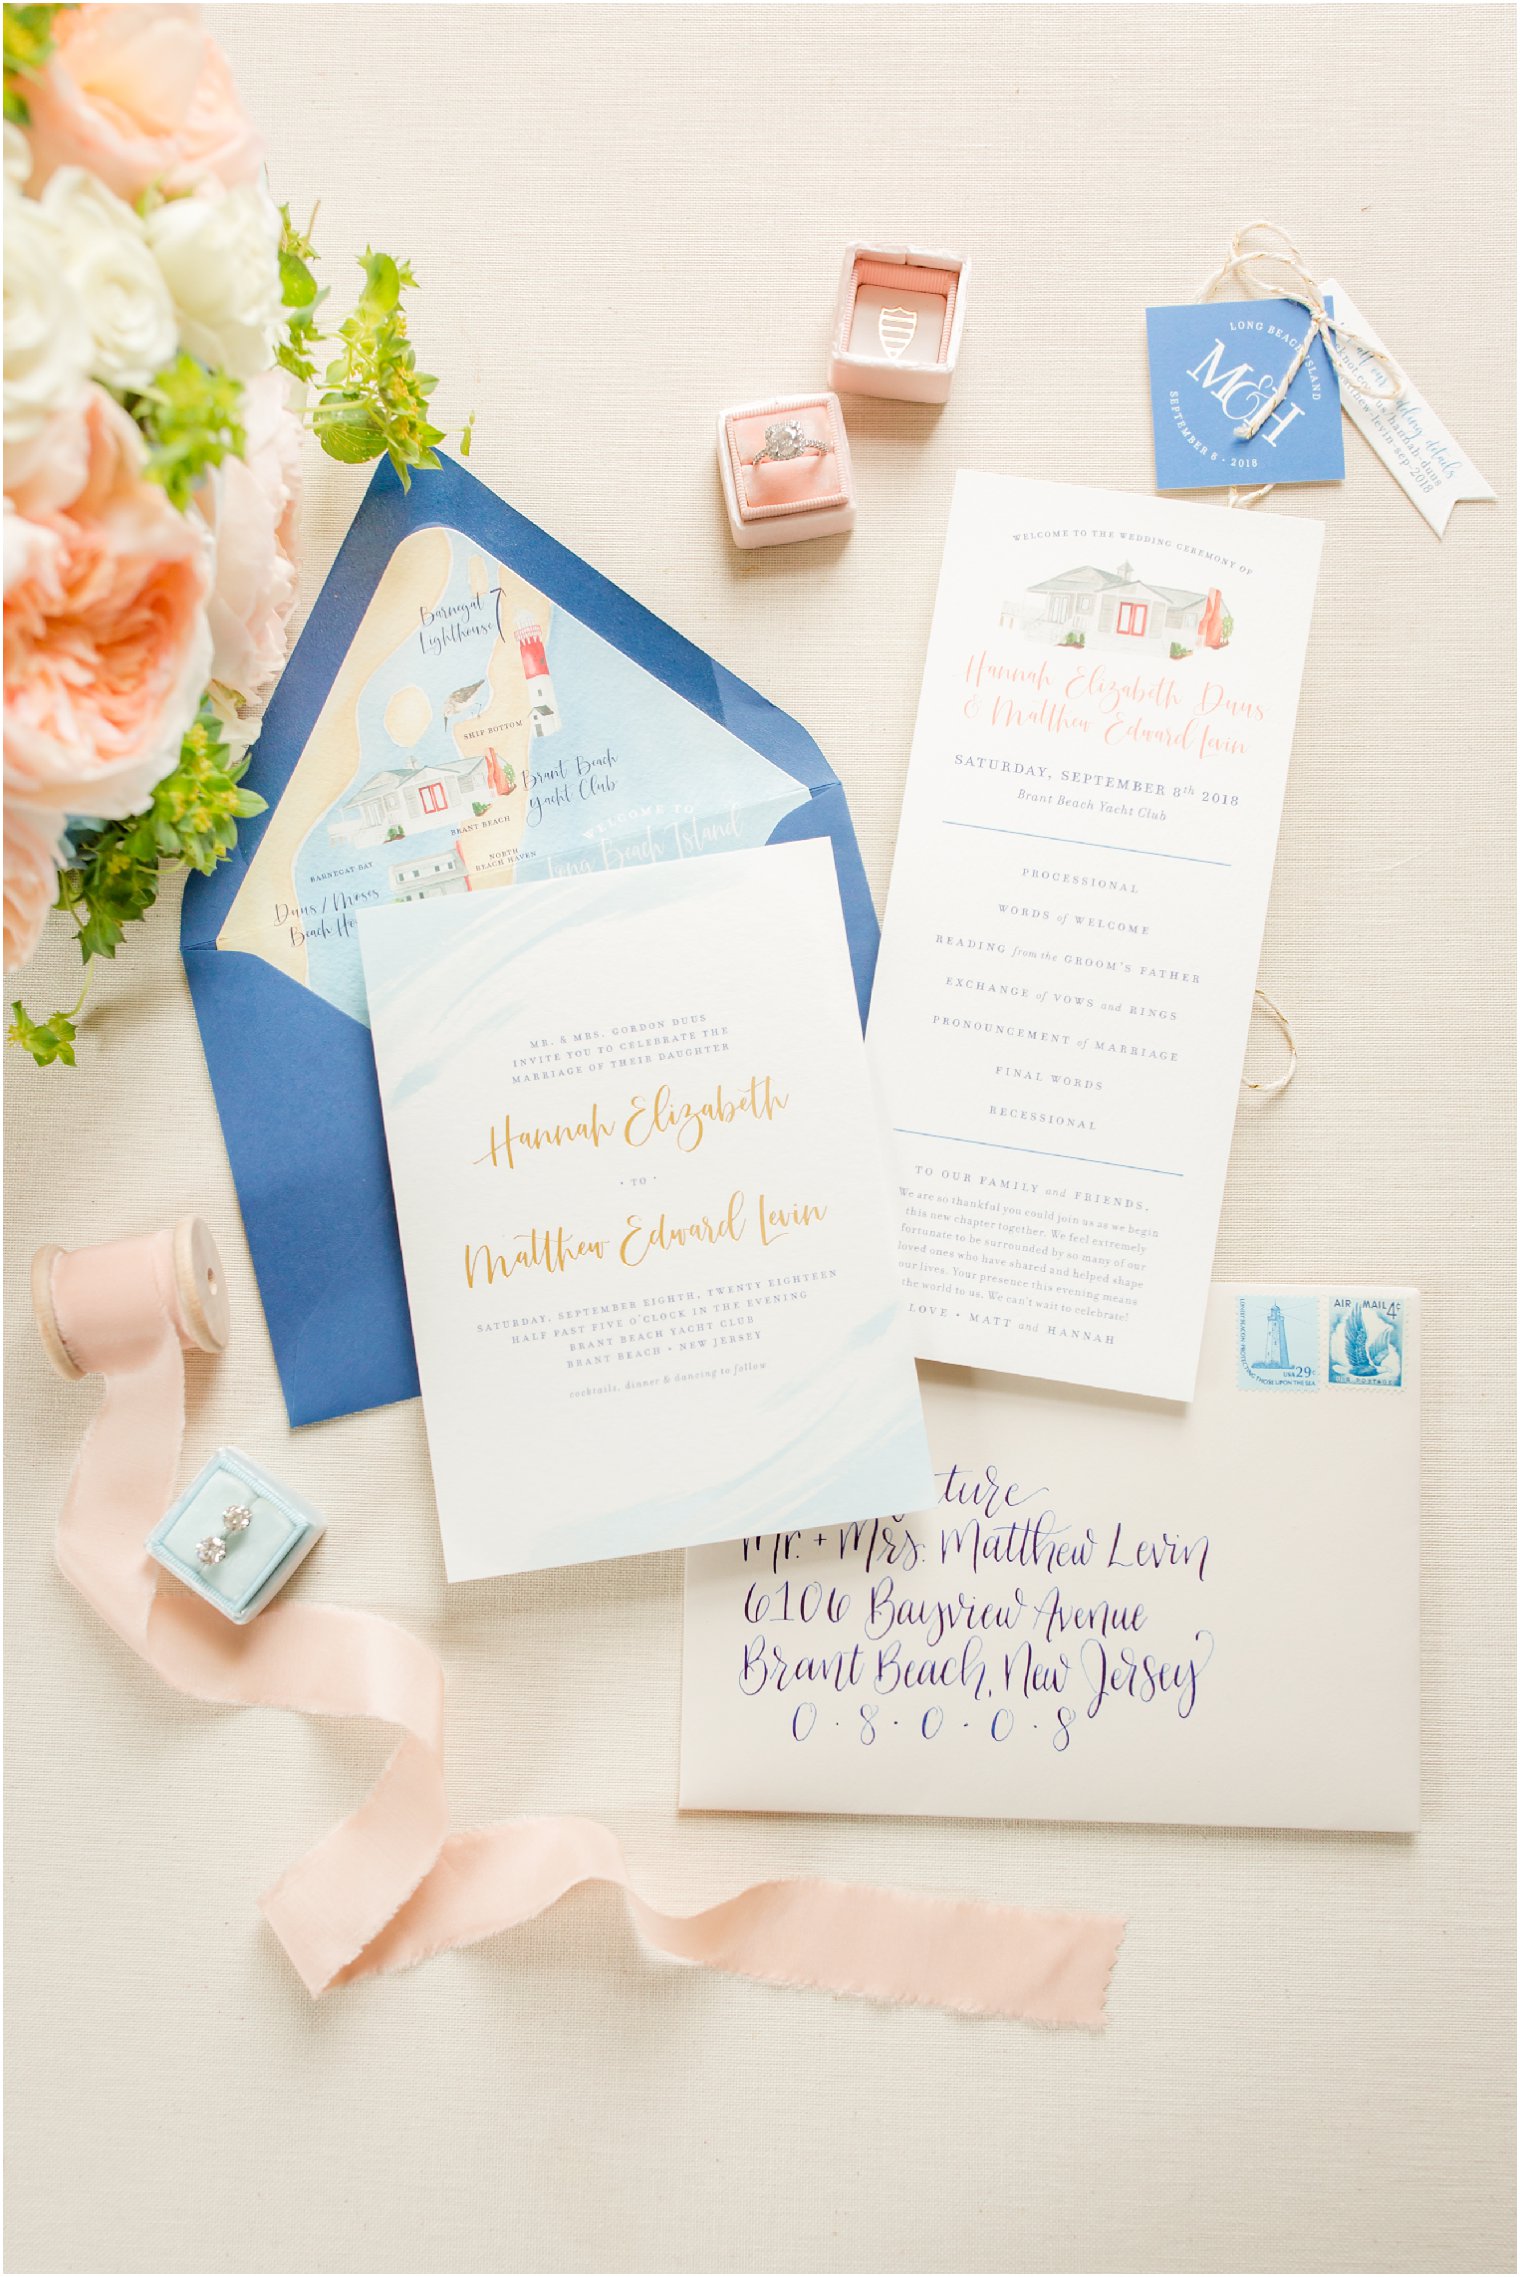 wedding invitation suite by Crisp by Britt photographed by Idalia Photography